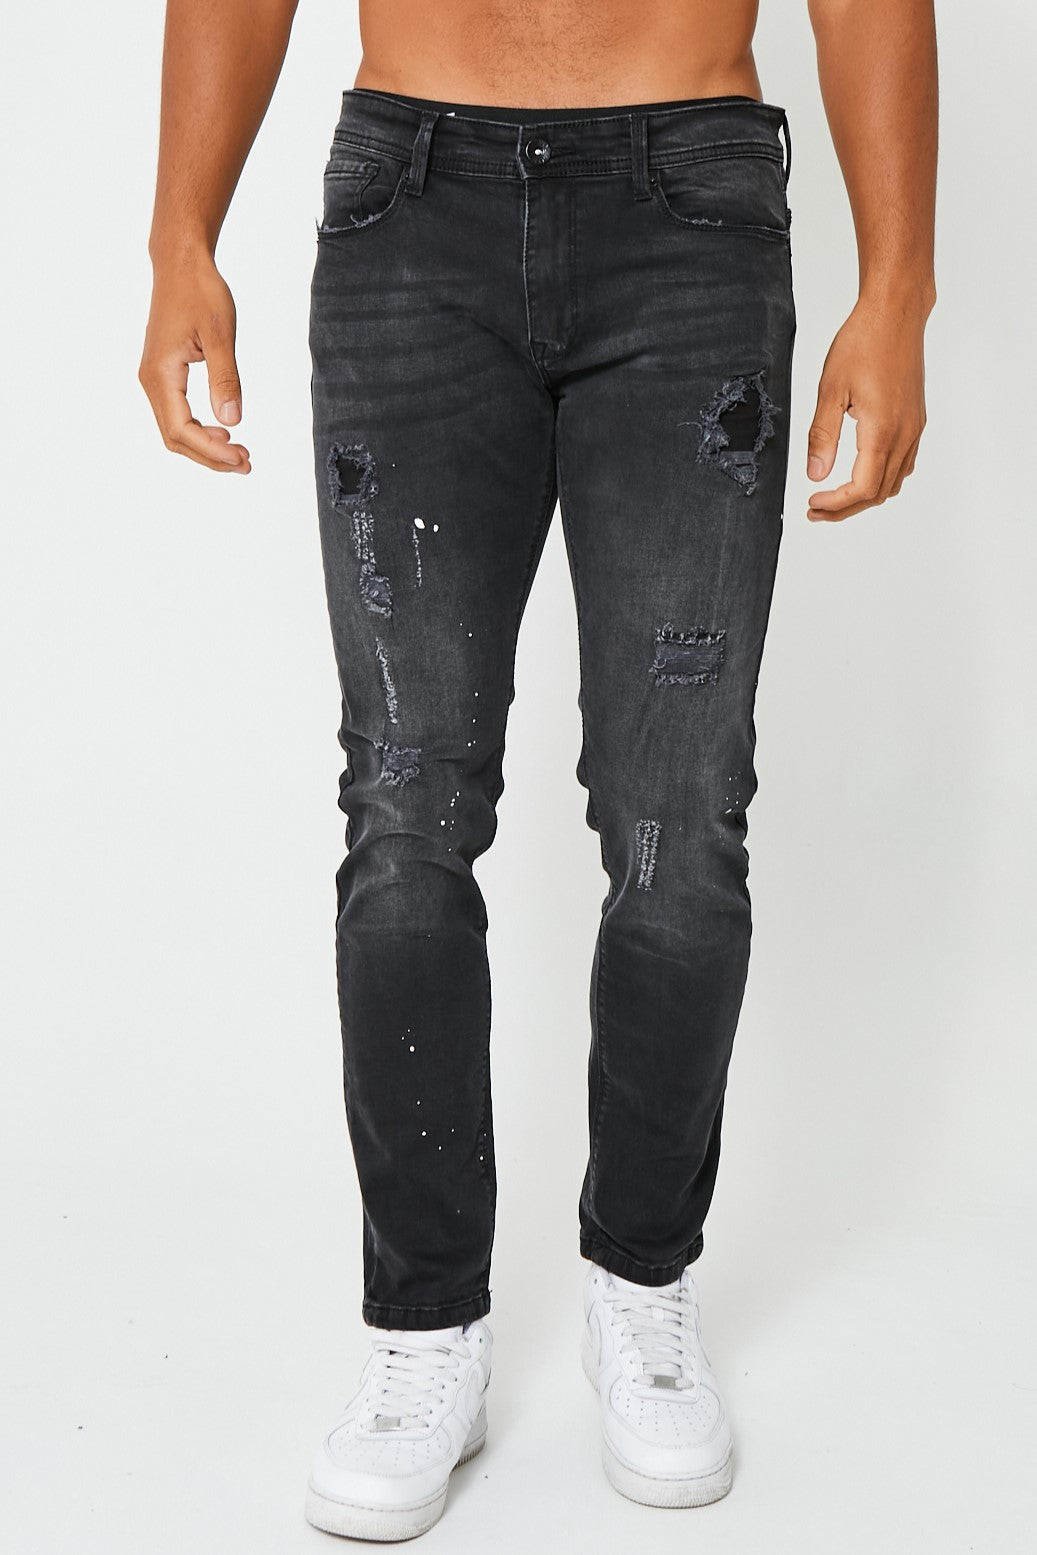 Hackray Antel Tapered Jean - Black product